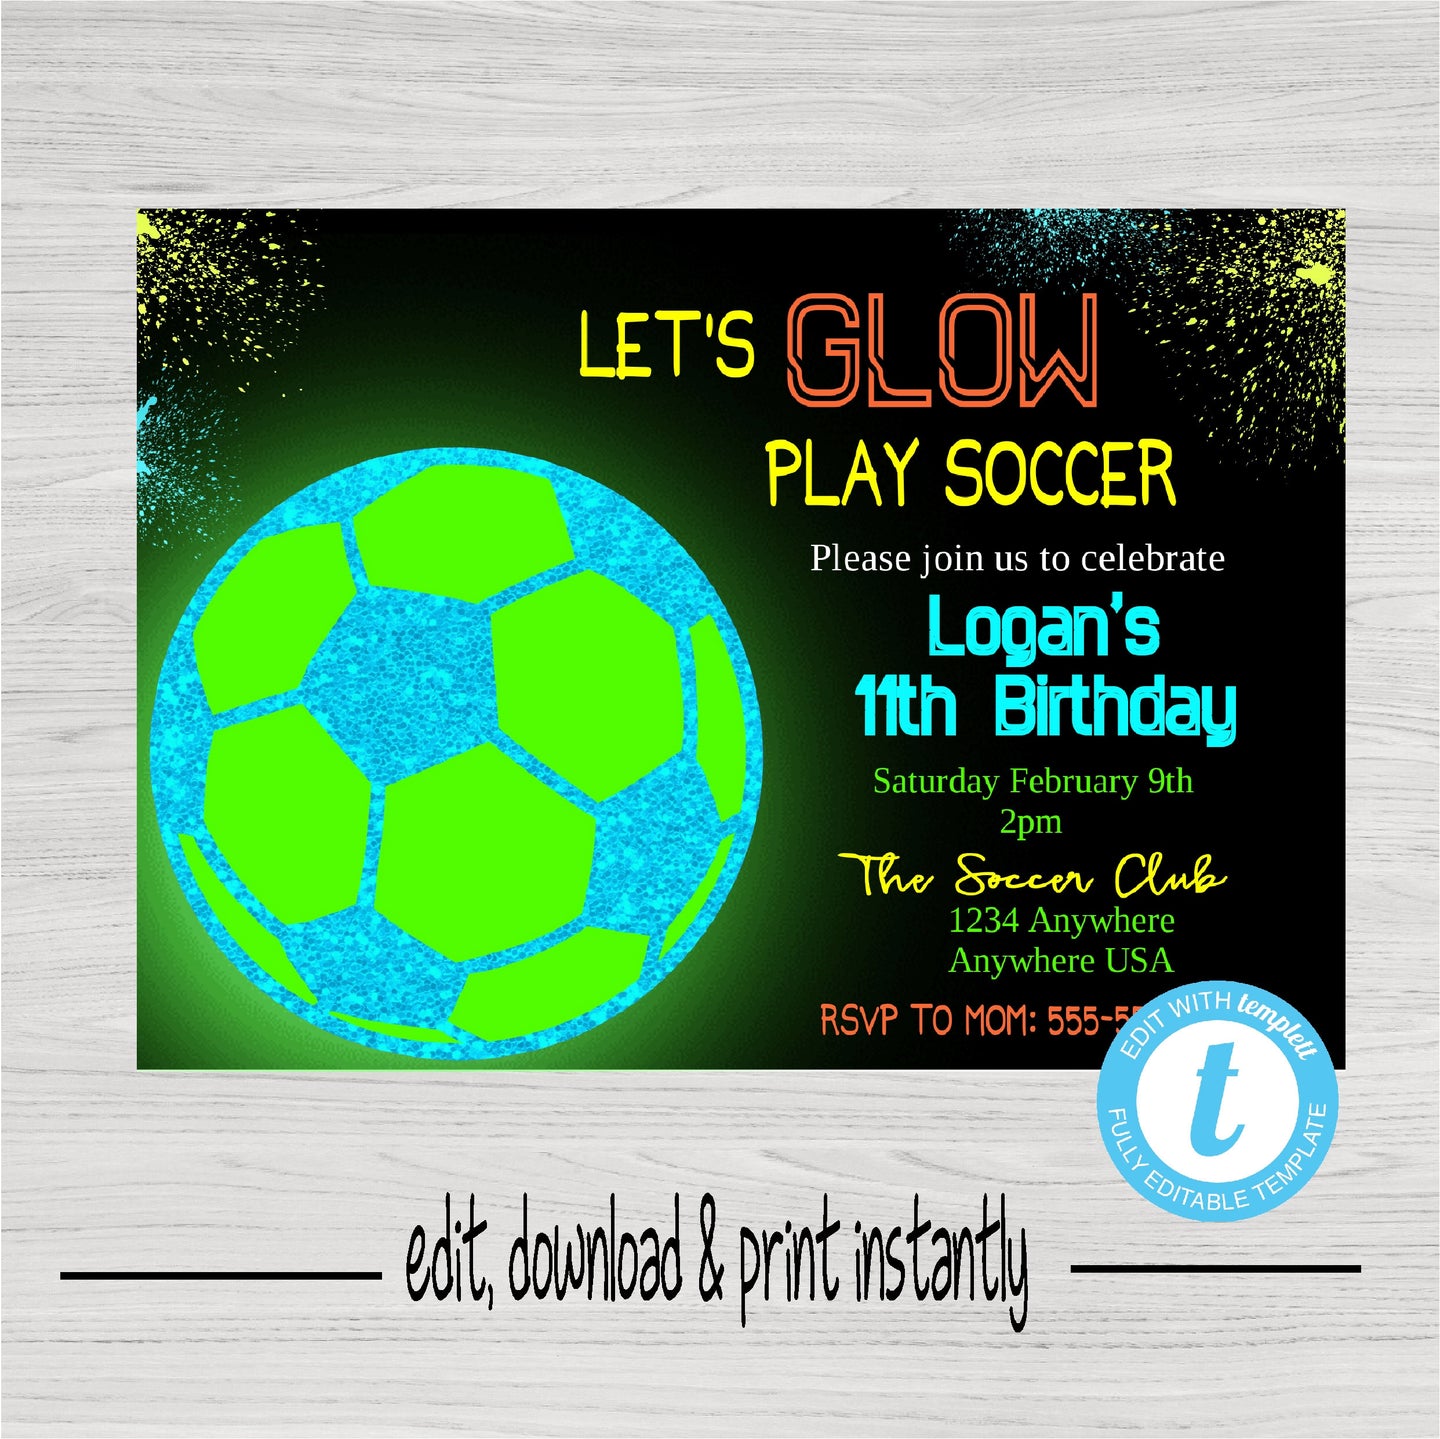 Soccer Party Invitation, Let's Glow Play Soccer, Birthday Party Invitation Template, Neon Birthday Party Invitation, Printable Party Invite